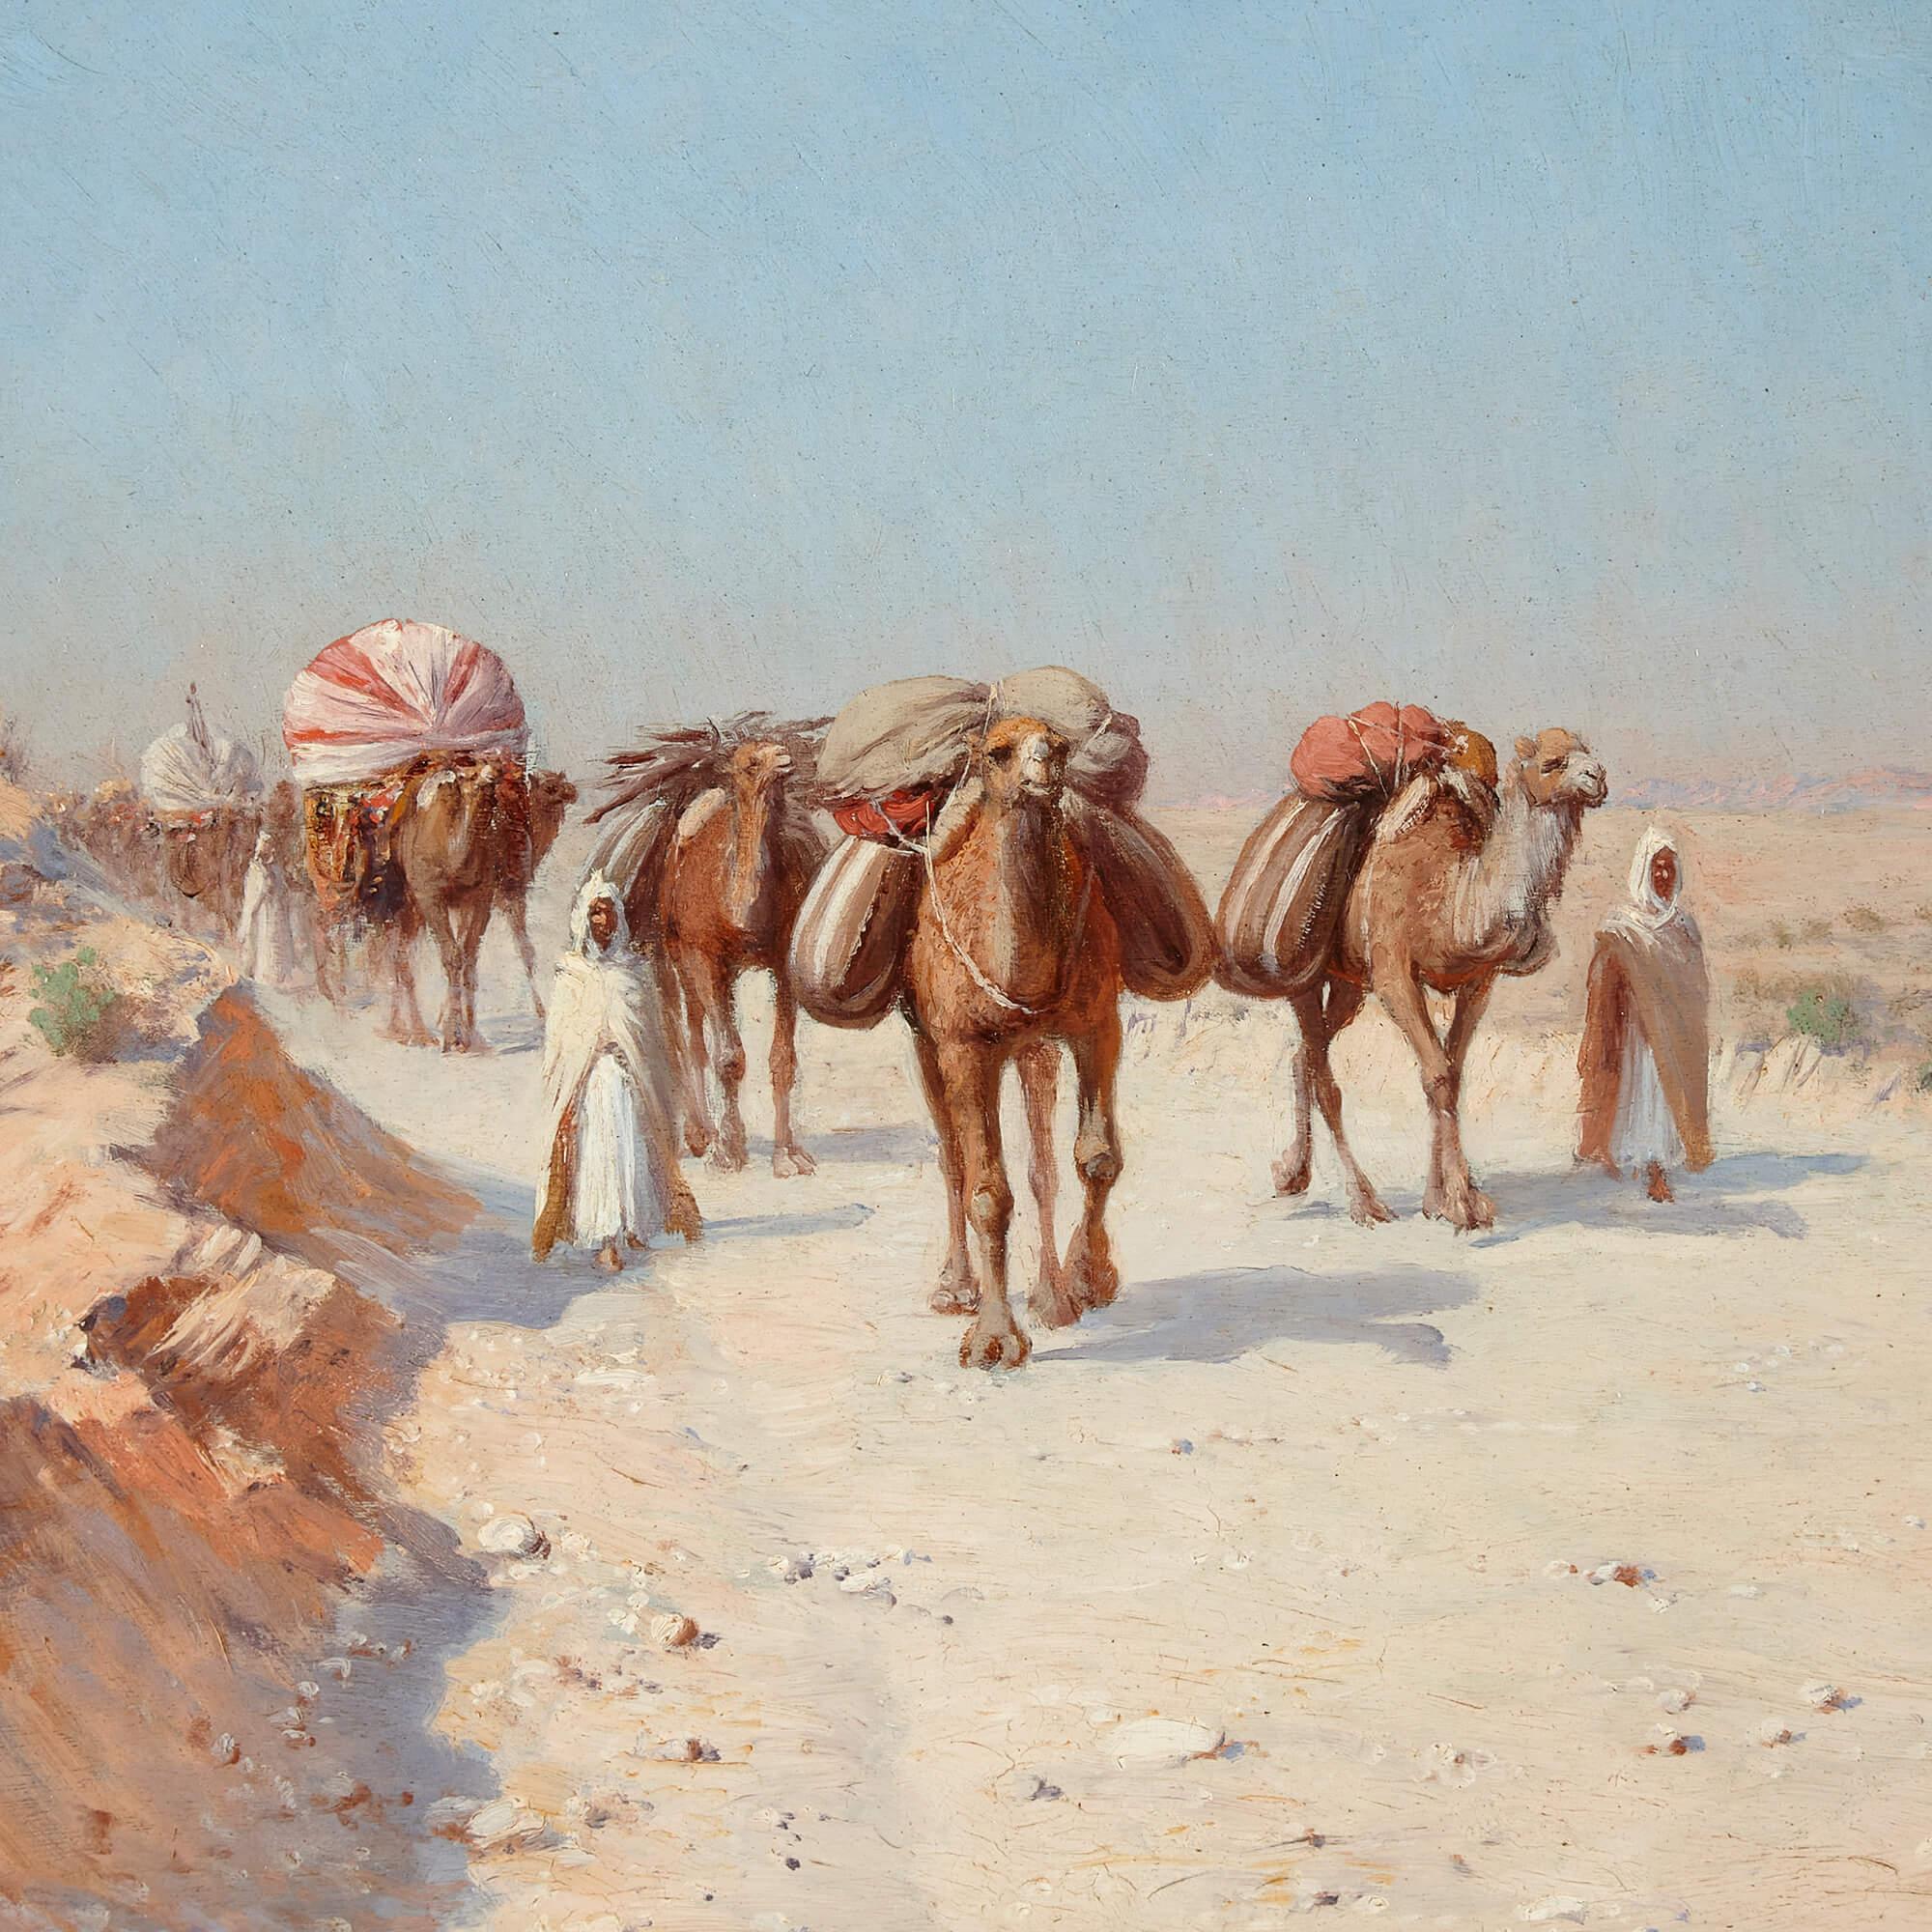 Orientalist Landscape with Camels Oil Painting by Lazerges 1